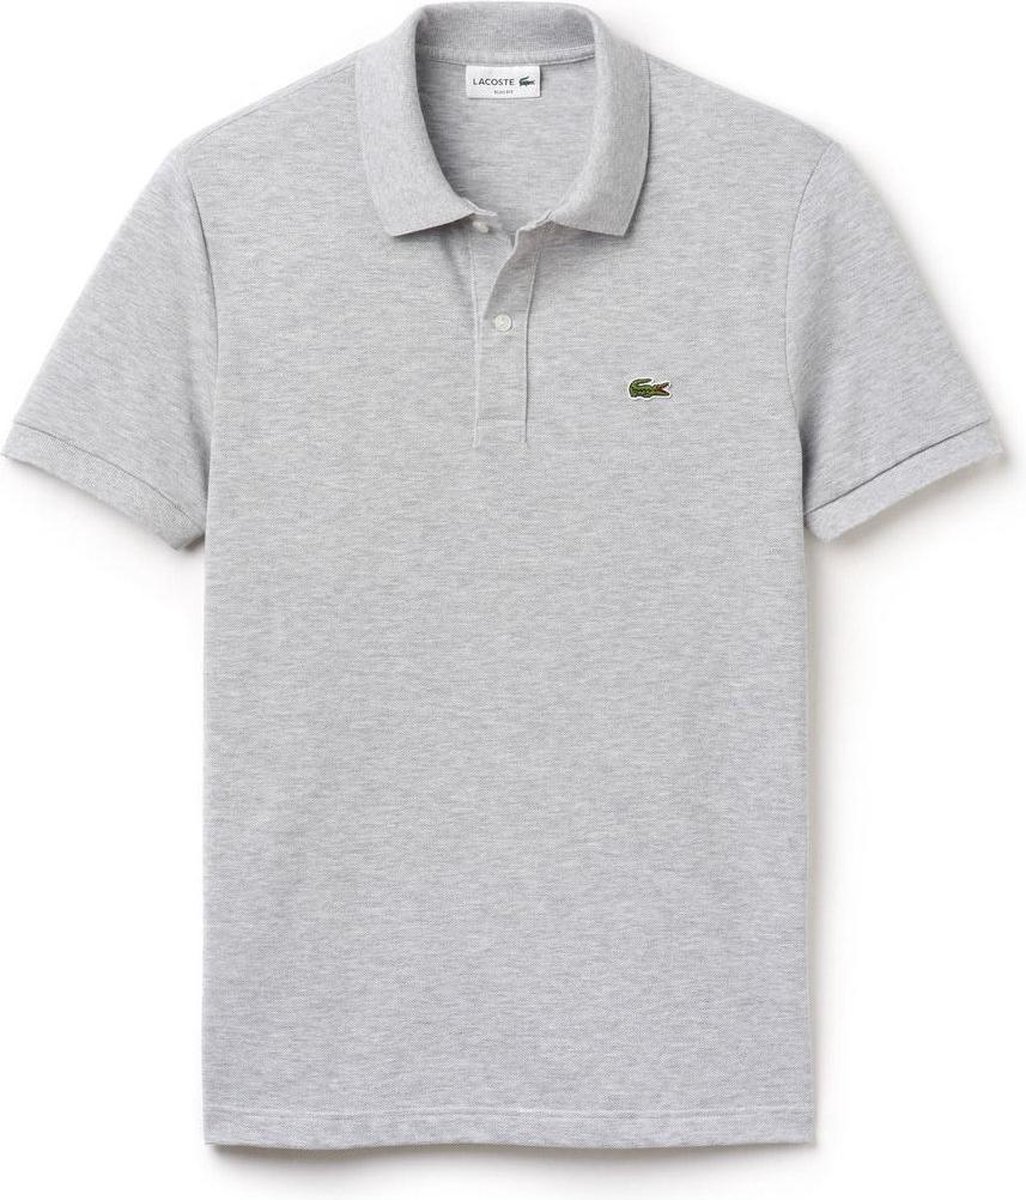 Lacoste - S - Heren Poloshirt - Silver Chine | DGM Outlet